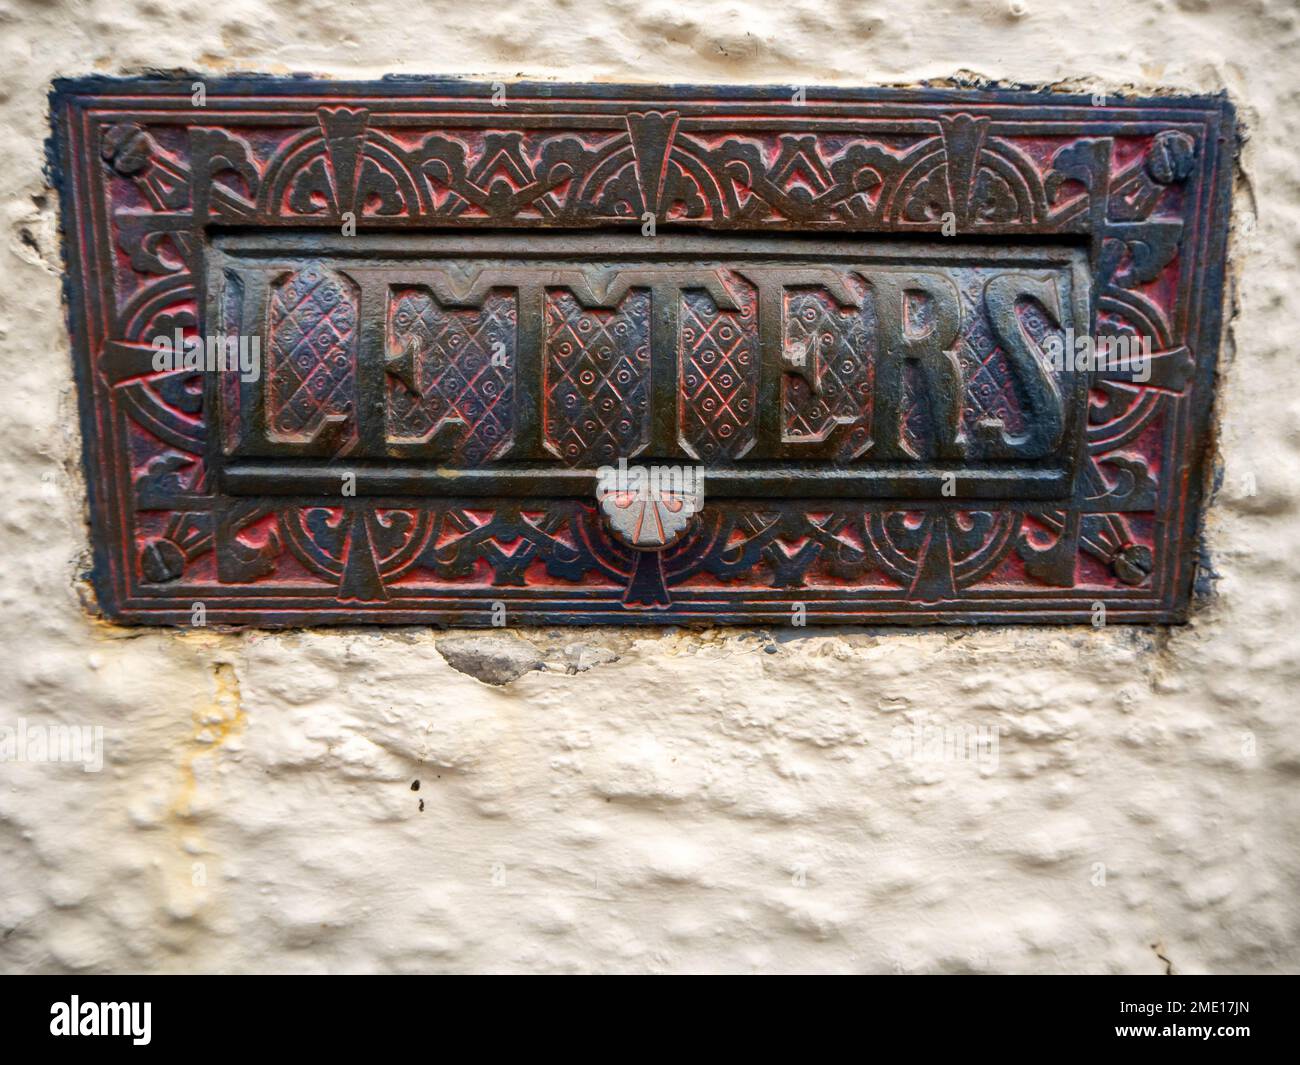 Historical style door furniture, letterbox with decorated border and embossed letters on the flap Stock Photo